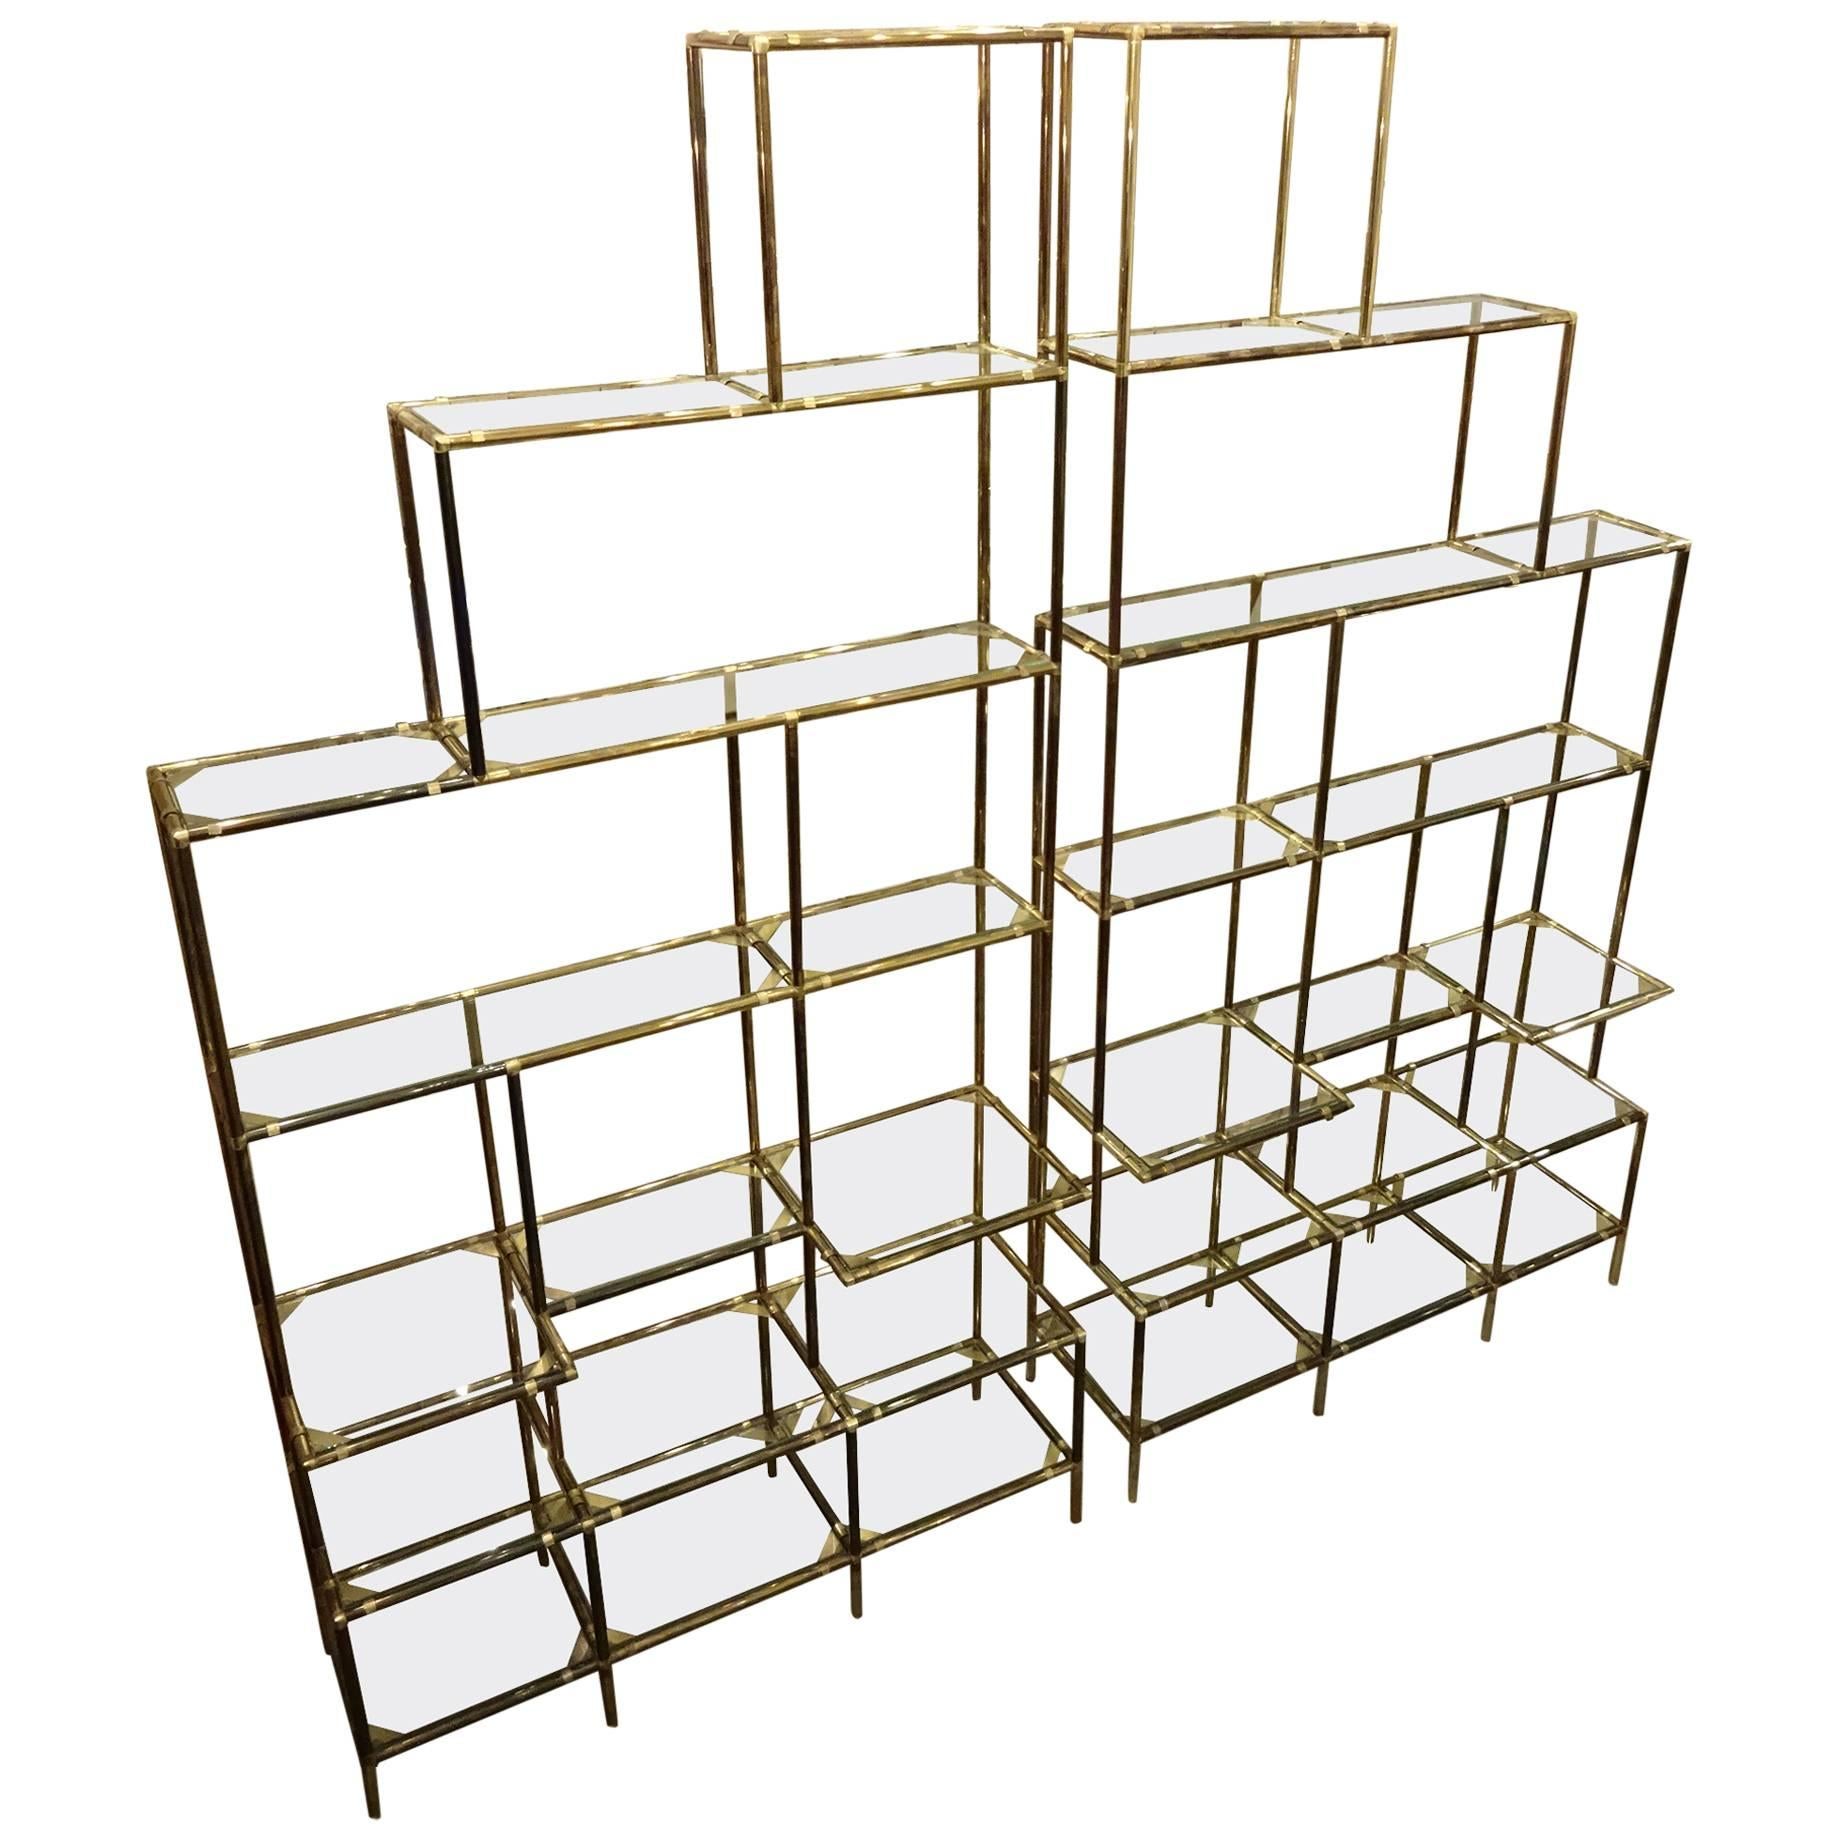 Pair of Italian Brass and Glass Shelving Units